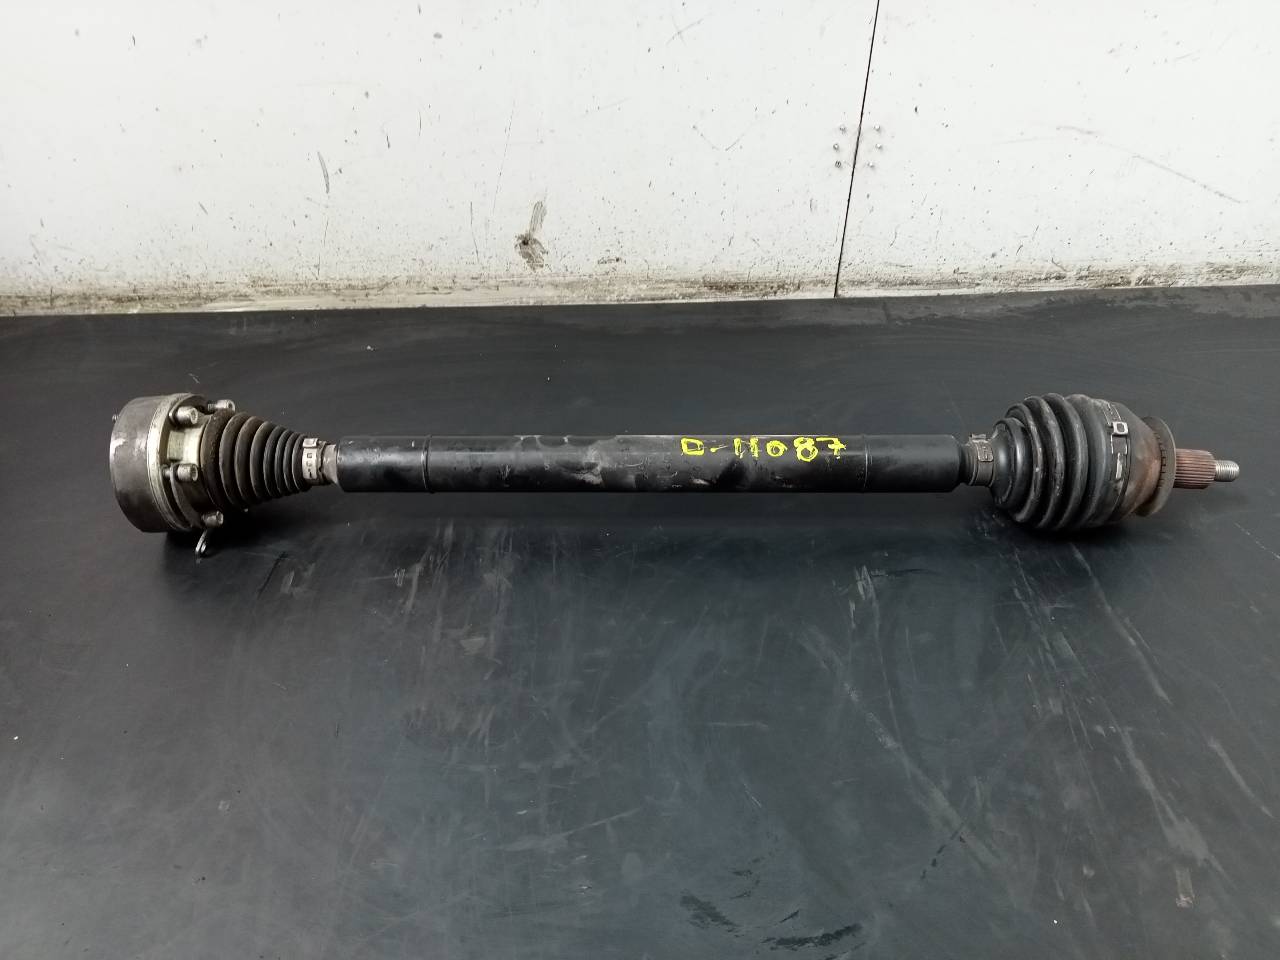 SEAT Toledo 4 generation (2012-2020) Front Right Driveshaft 6R0407762A, P1-A6-21 21802481